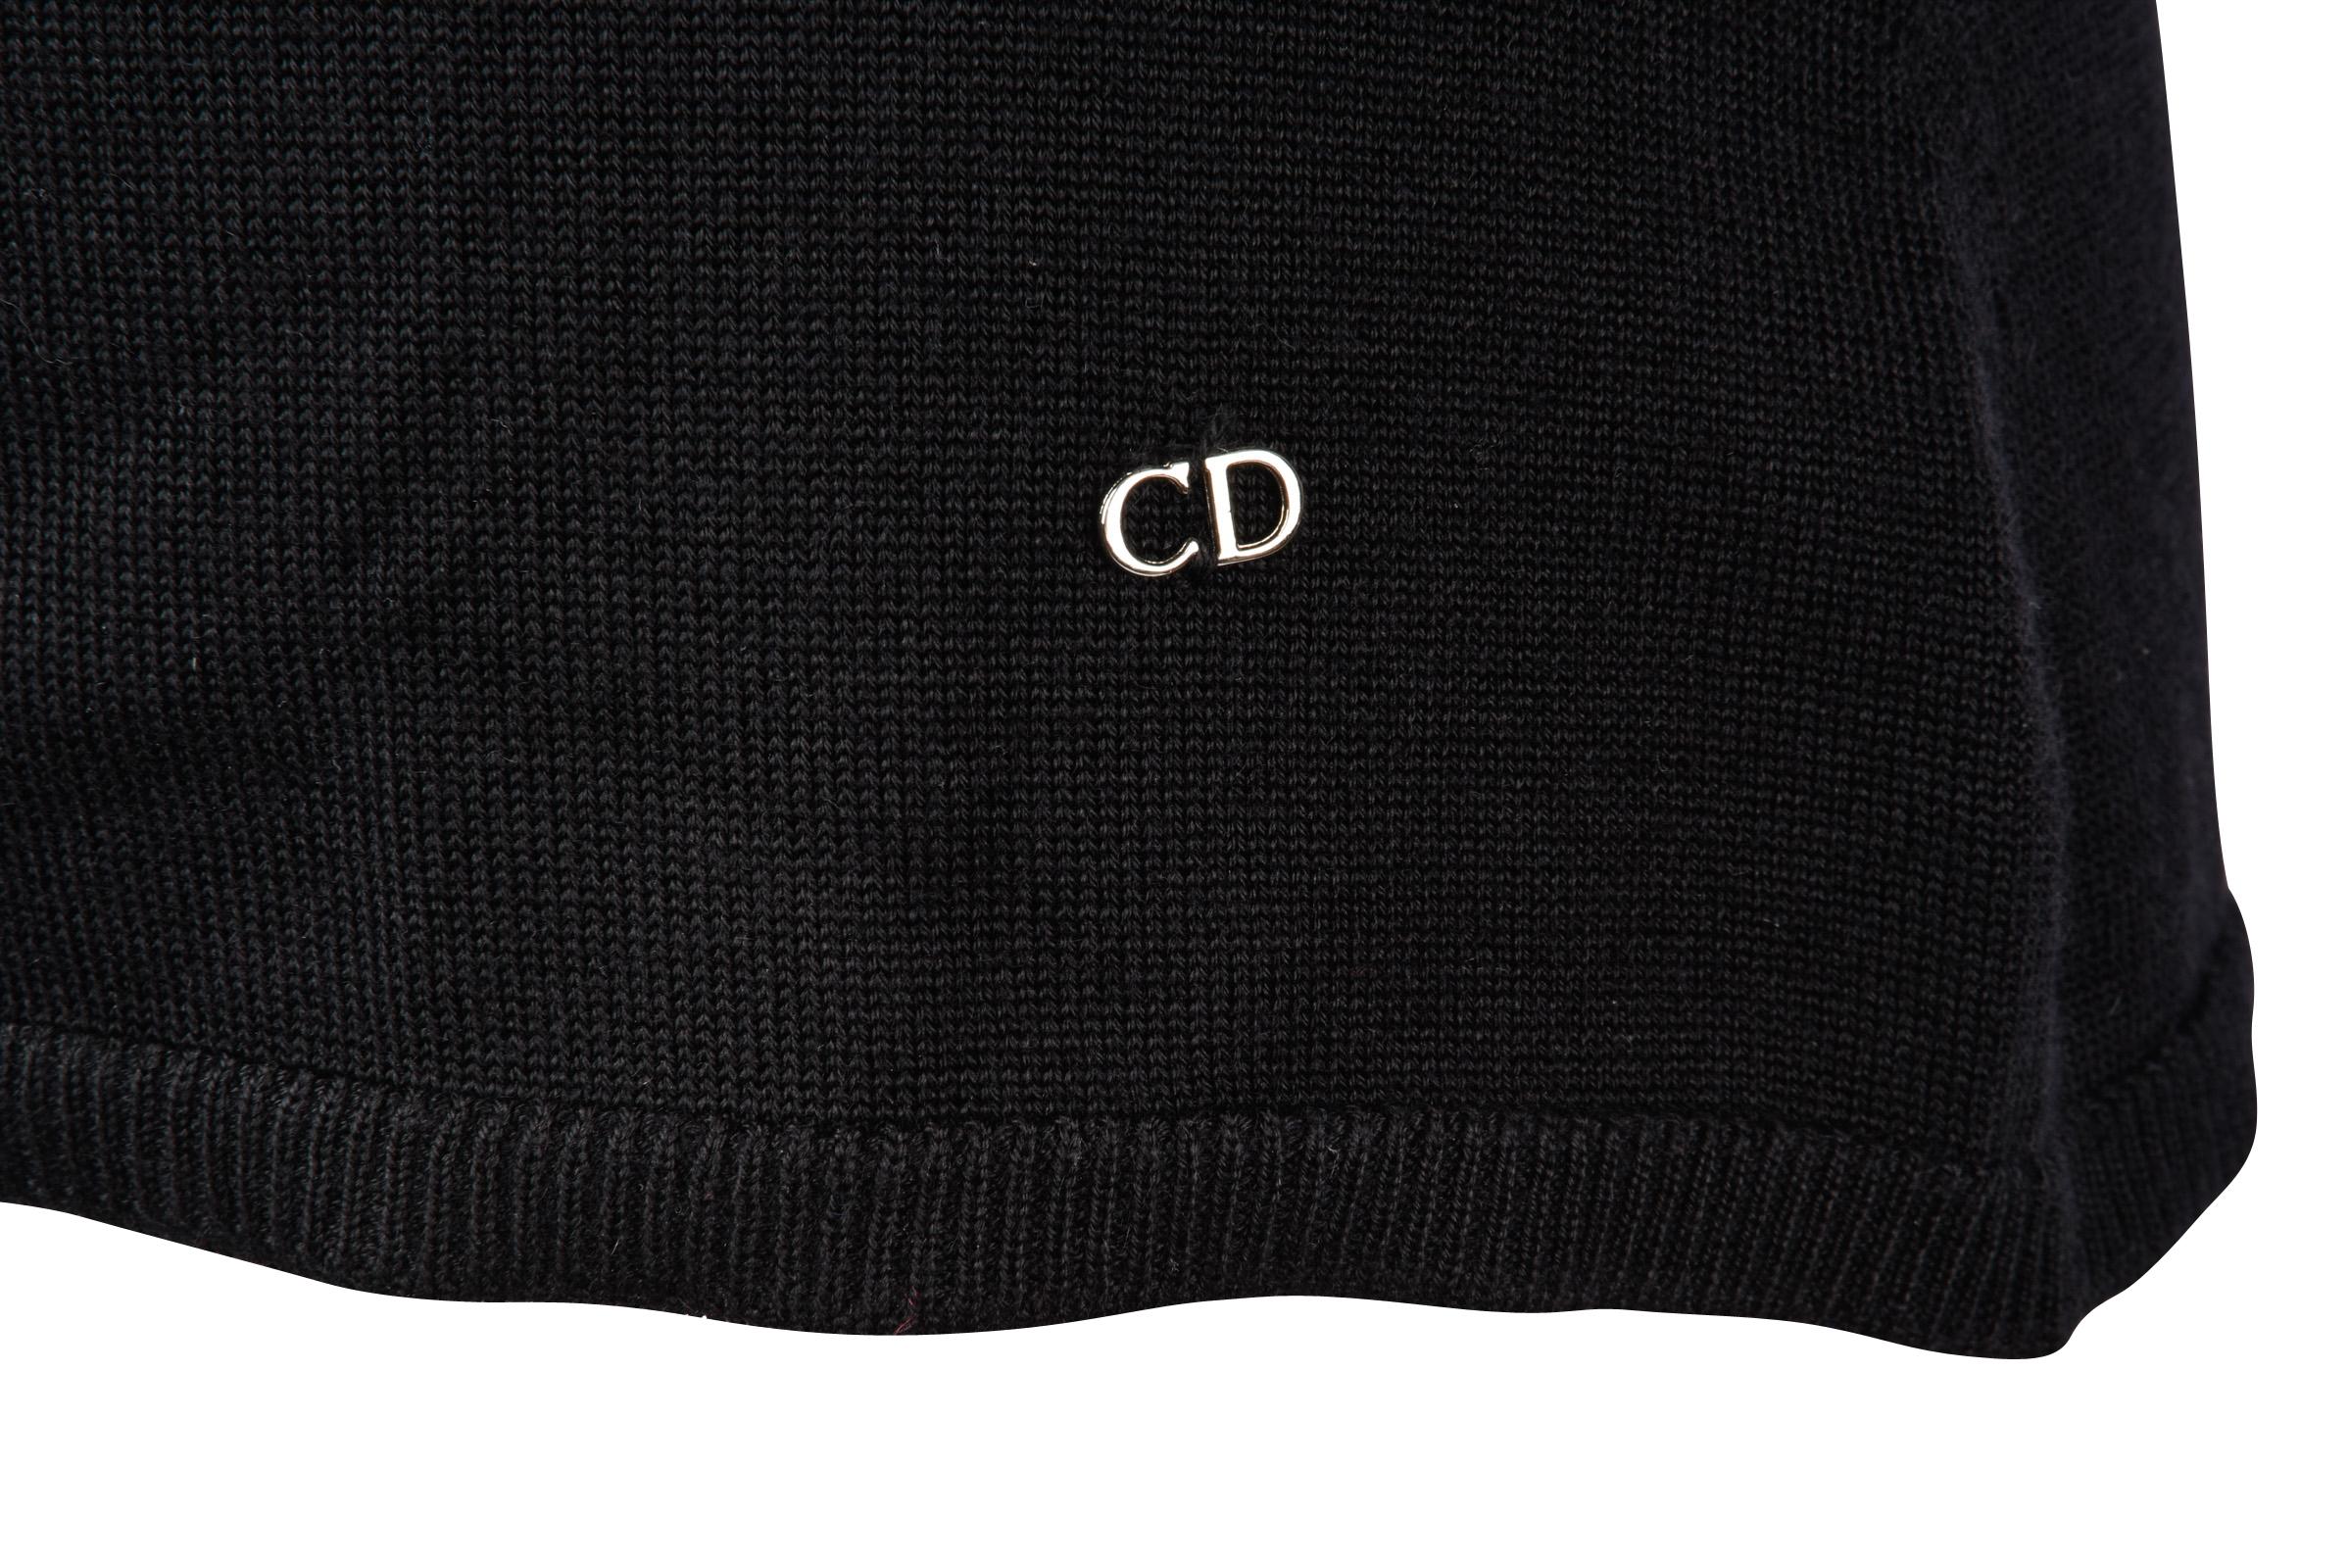 Guaranteed authentic Christian Dior black 3/4 length sleeve cashmere top. 
Scalloped V-neck 
Silver logo plaque bottom left.
Top is pullover. 
Fabric is cashmere and silk.
final sale

SIZE  8

TOP MEASURES: 
LENGTH  24